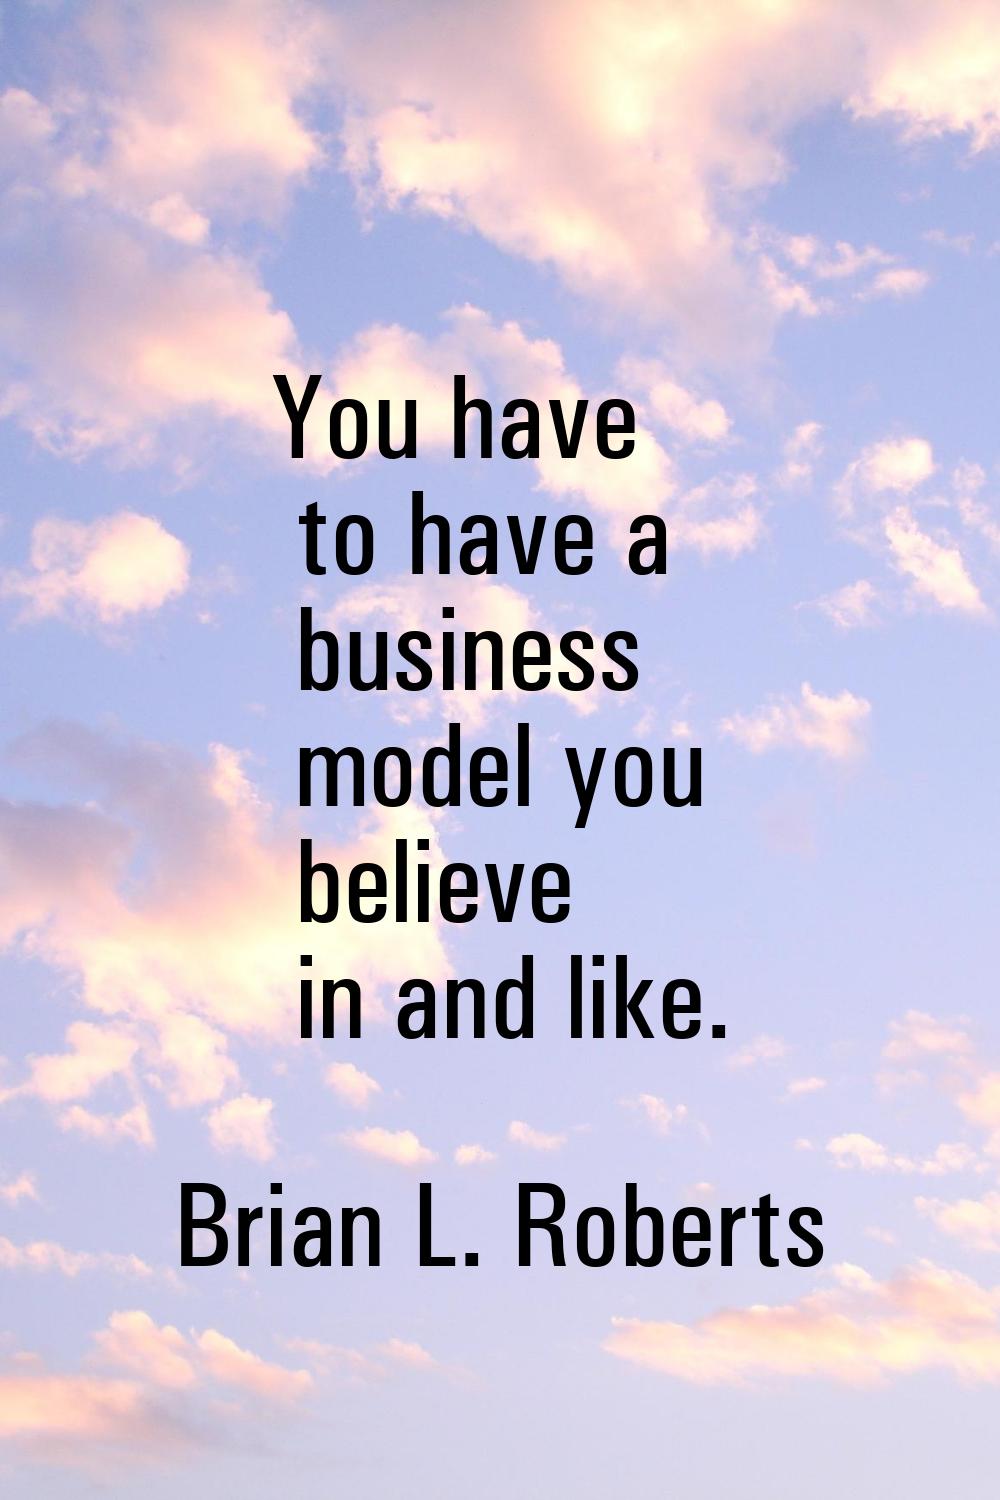 You have to have a business model you believe in and like.